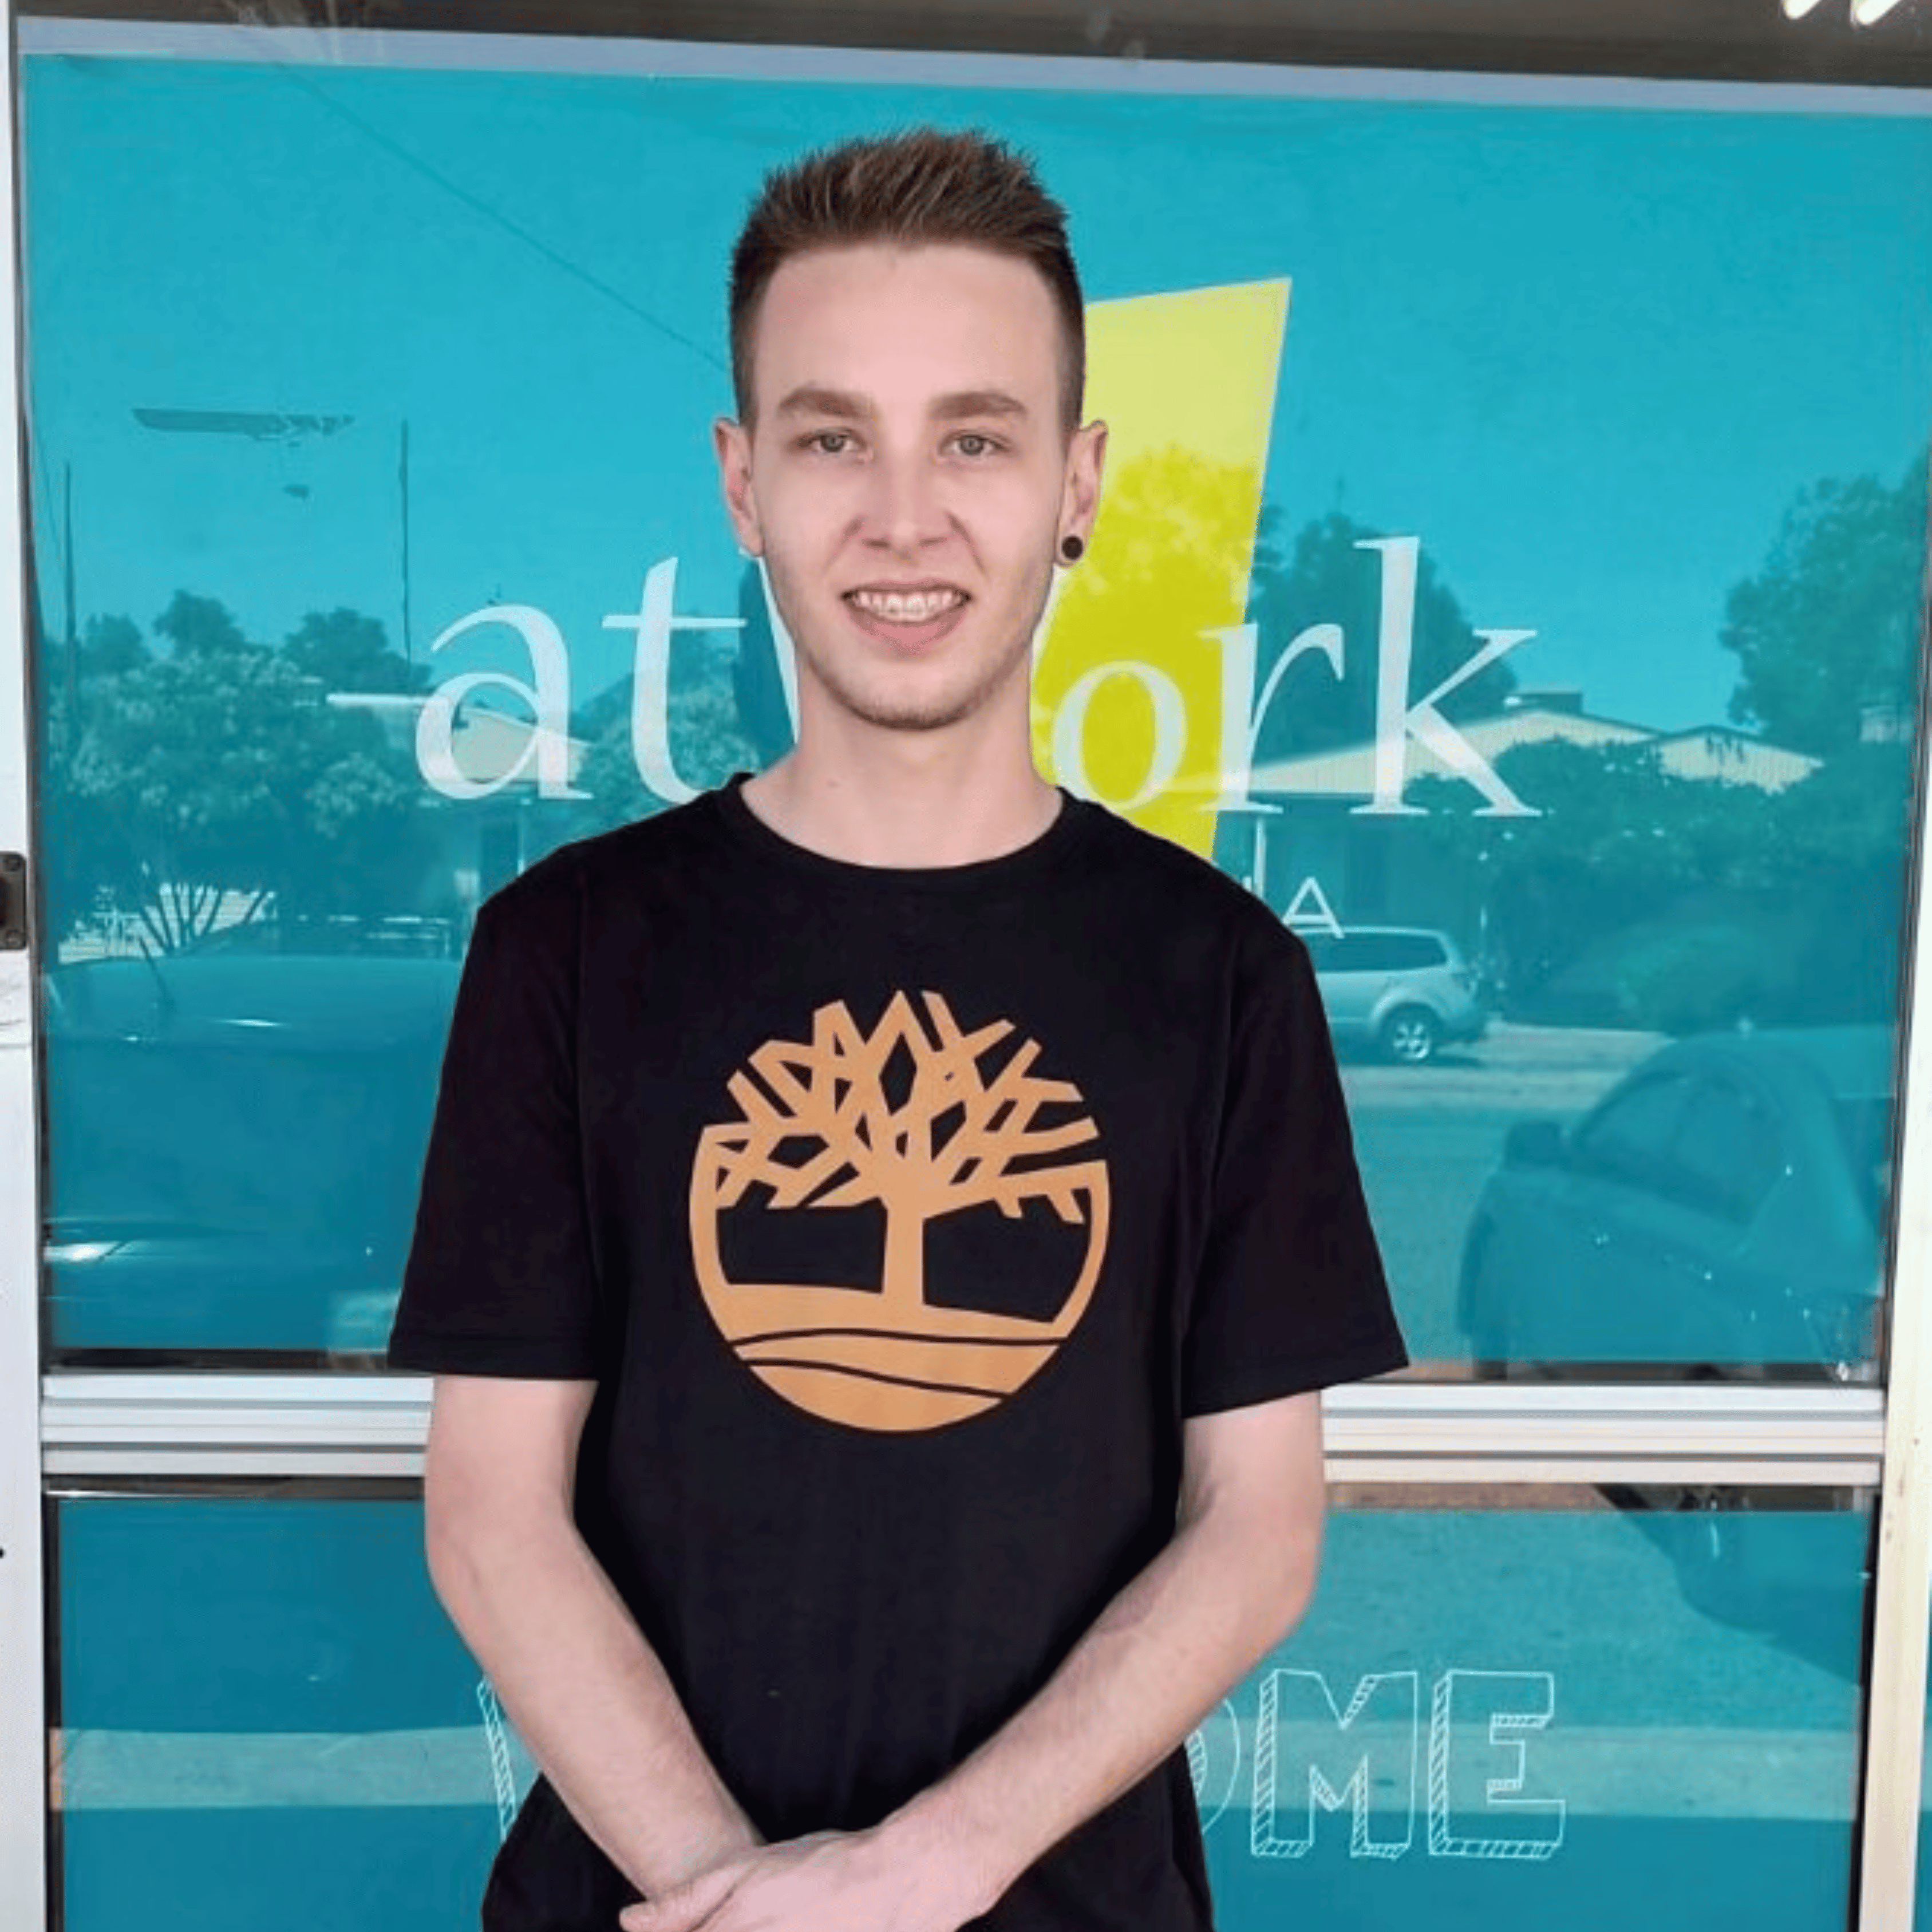 New employment helps Sean to rebuild confidence and connect with people again